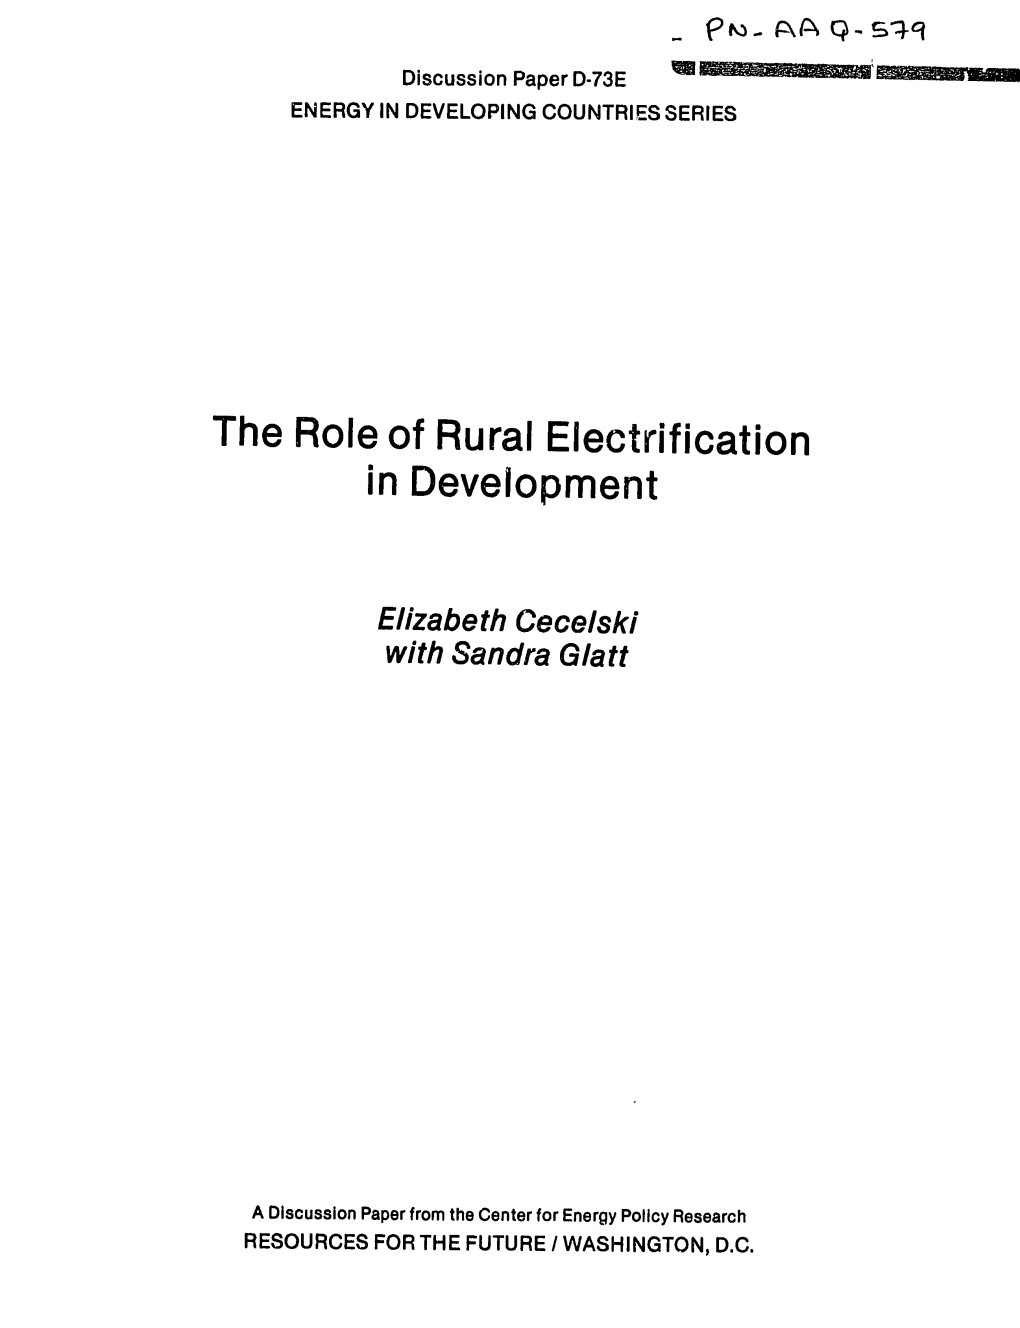 The Role of Rural Electrification in Development